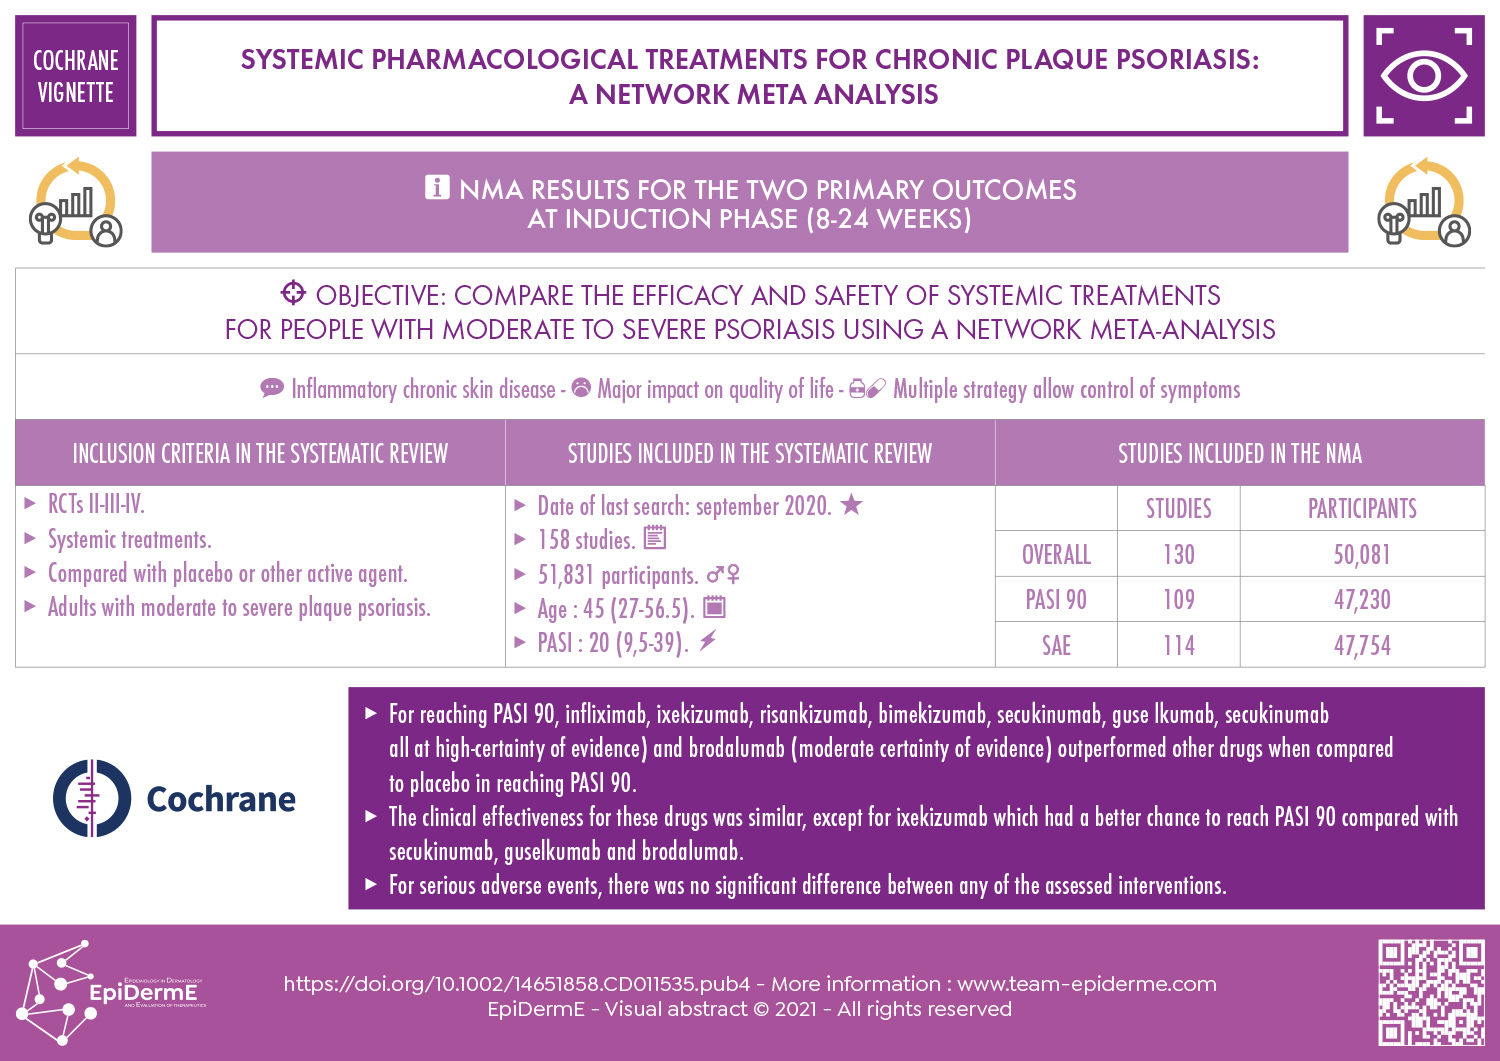 Systemic pharmacological treatments for chronic plaque psoriasis: a network meta-analysis